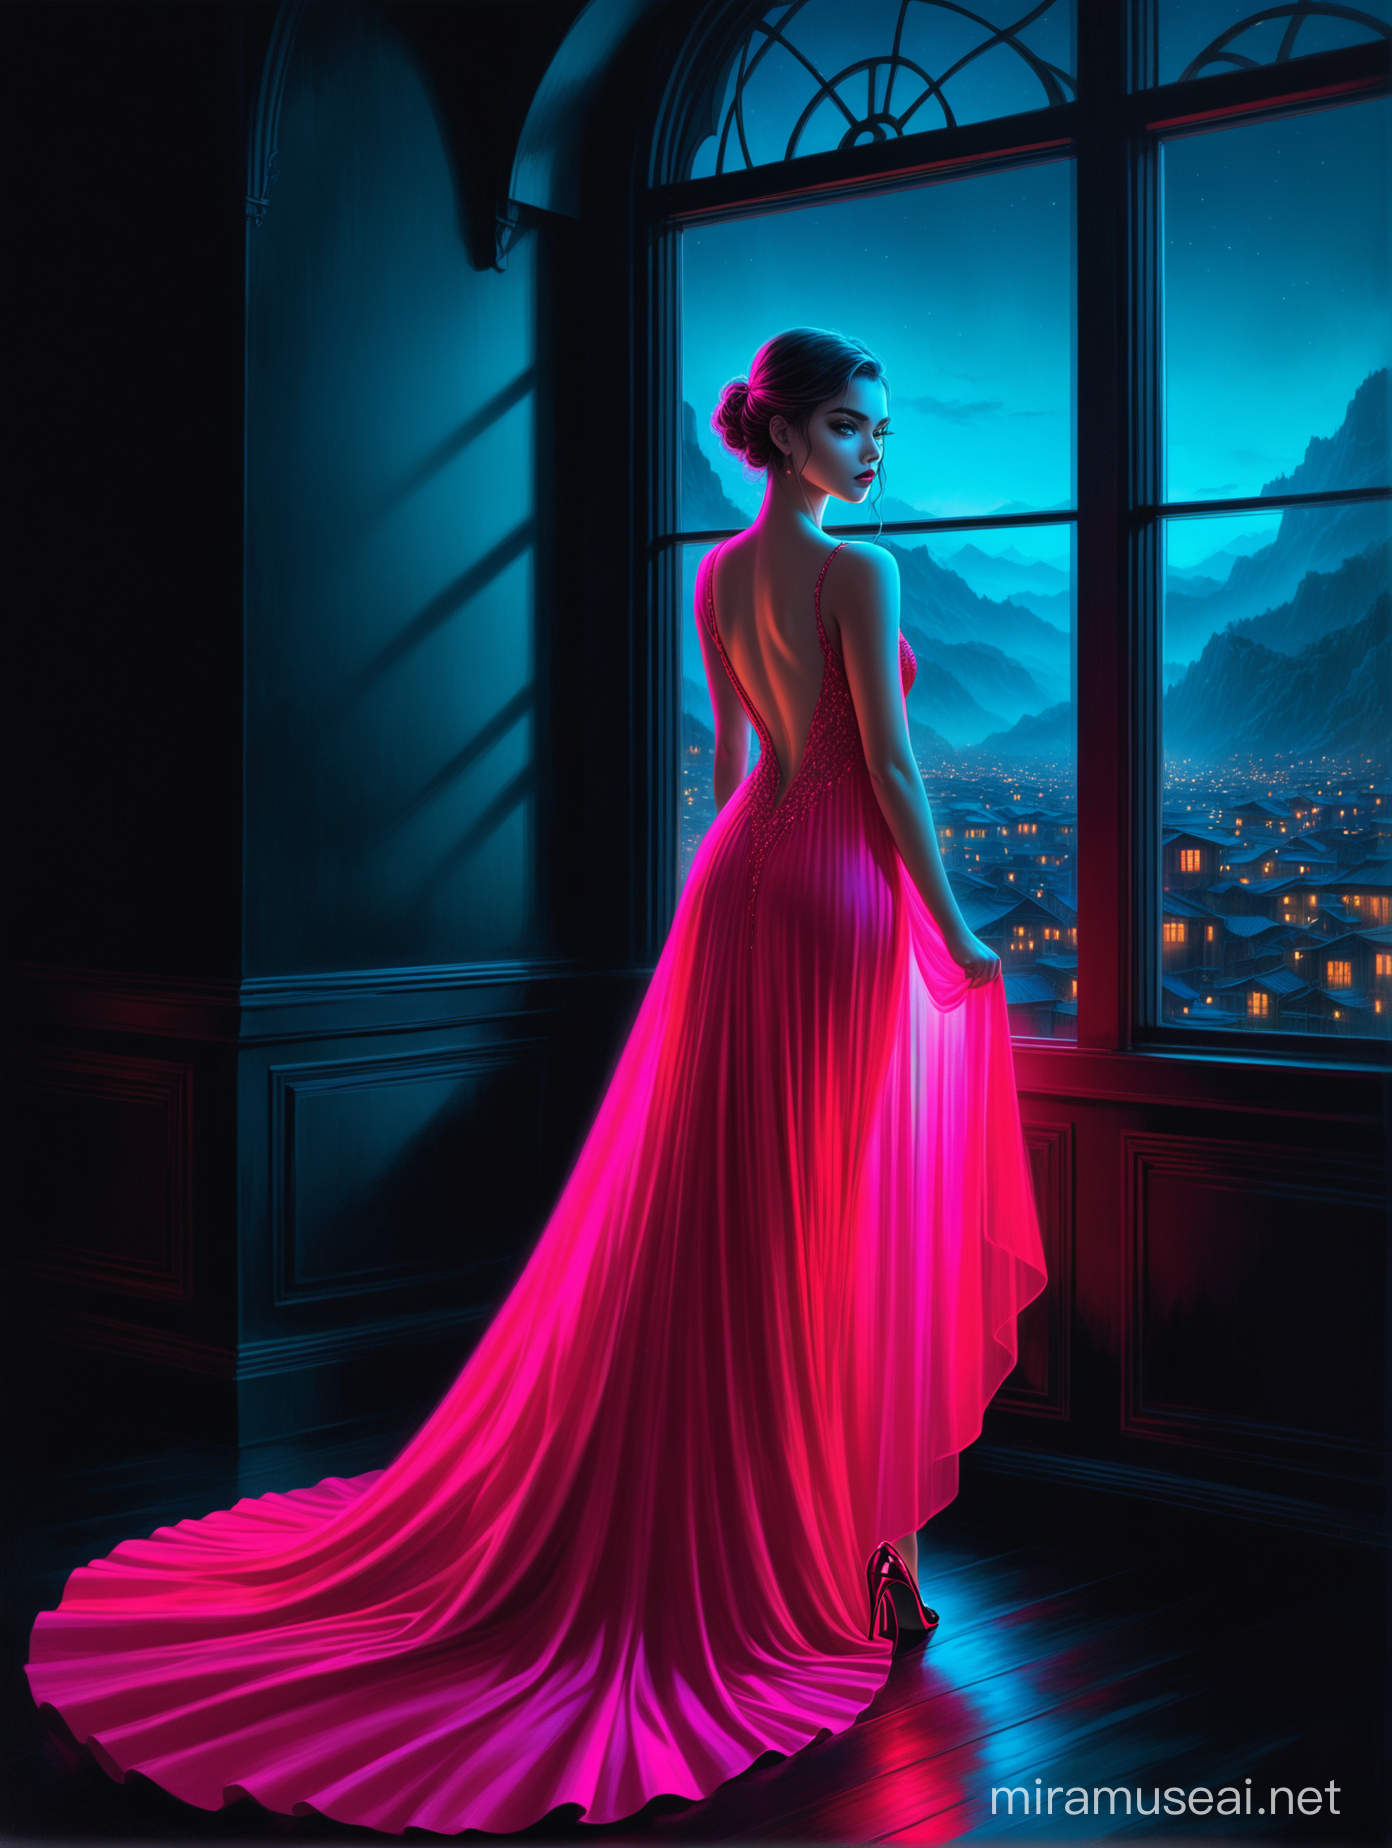 Elegant Woman in Stunning Evening Dress Staring Anxiously Out a NeonLit Window